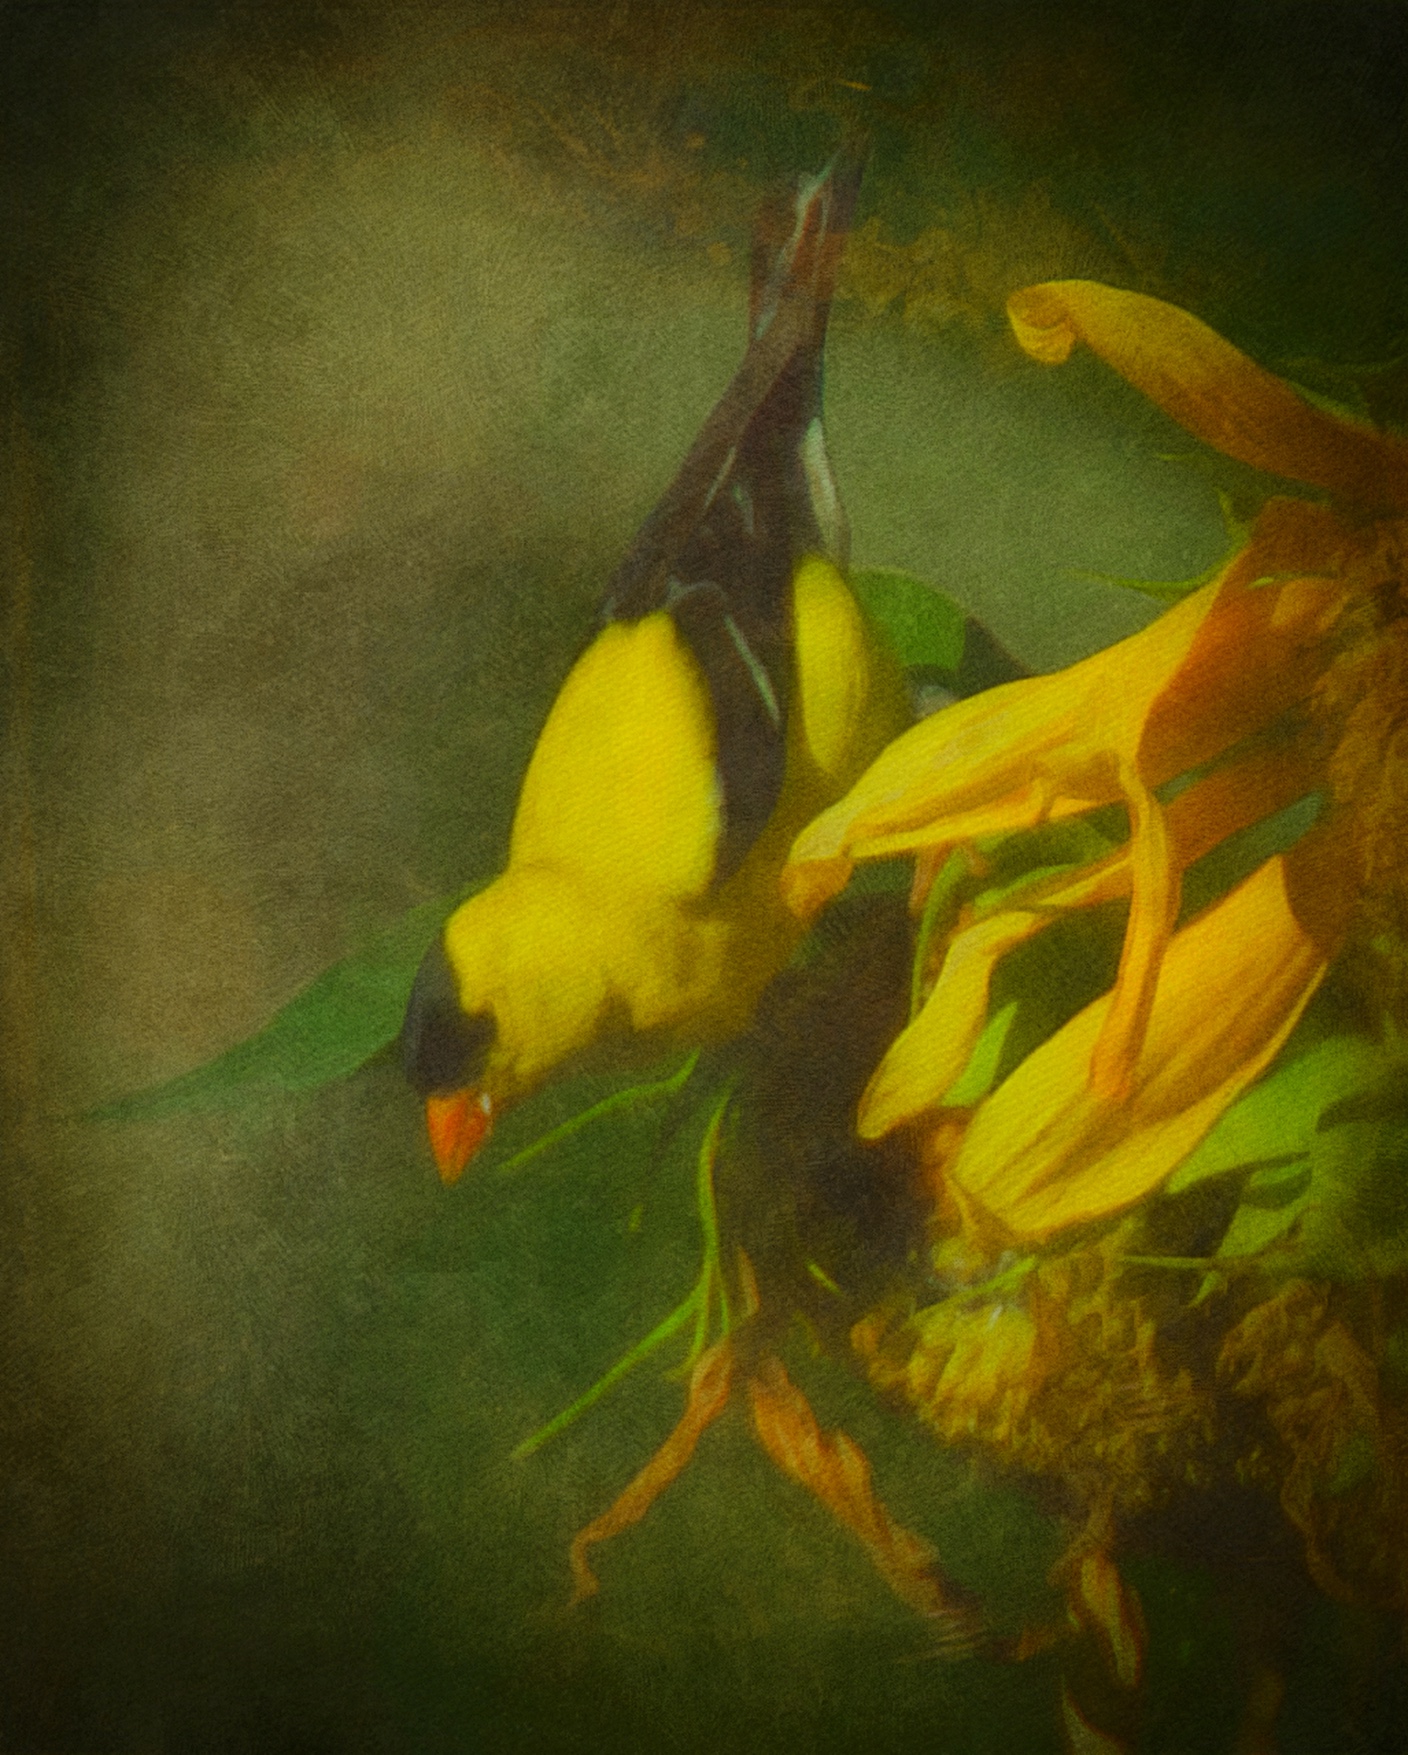 Processed image of the Goldfinch